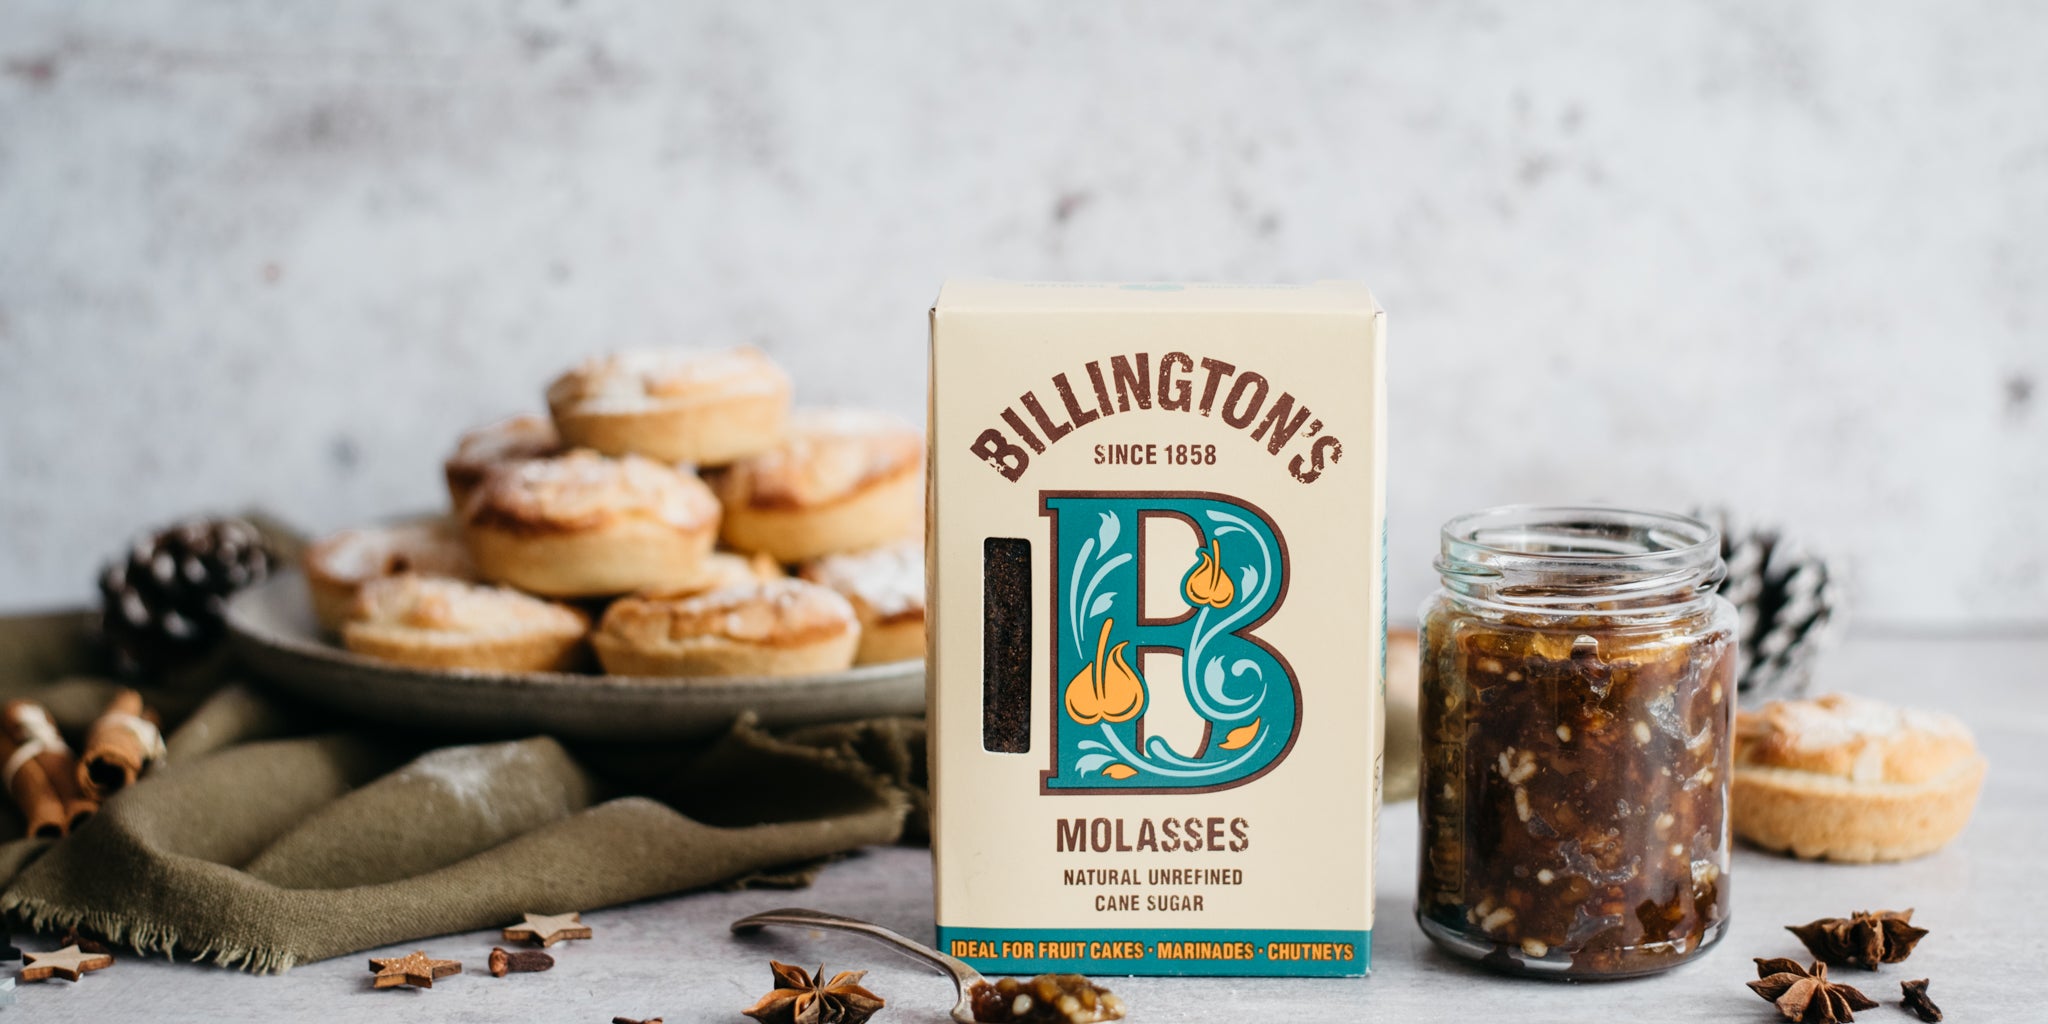 Frangipane Mince Pies on a plate, with a box of Billington's Molasses in the foreground, next to a jar of luxury mince meat